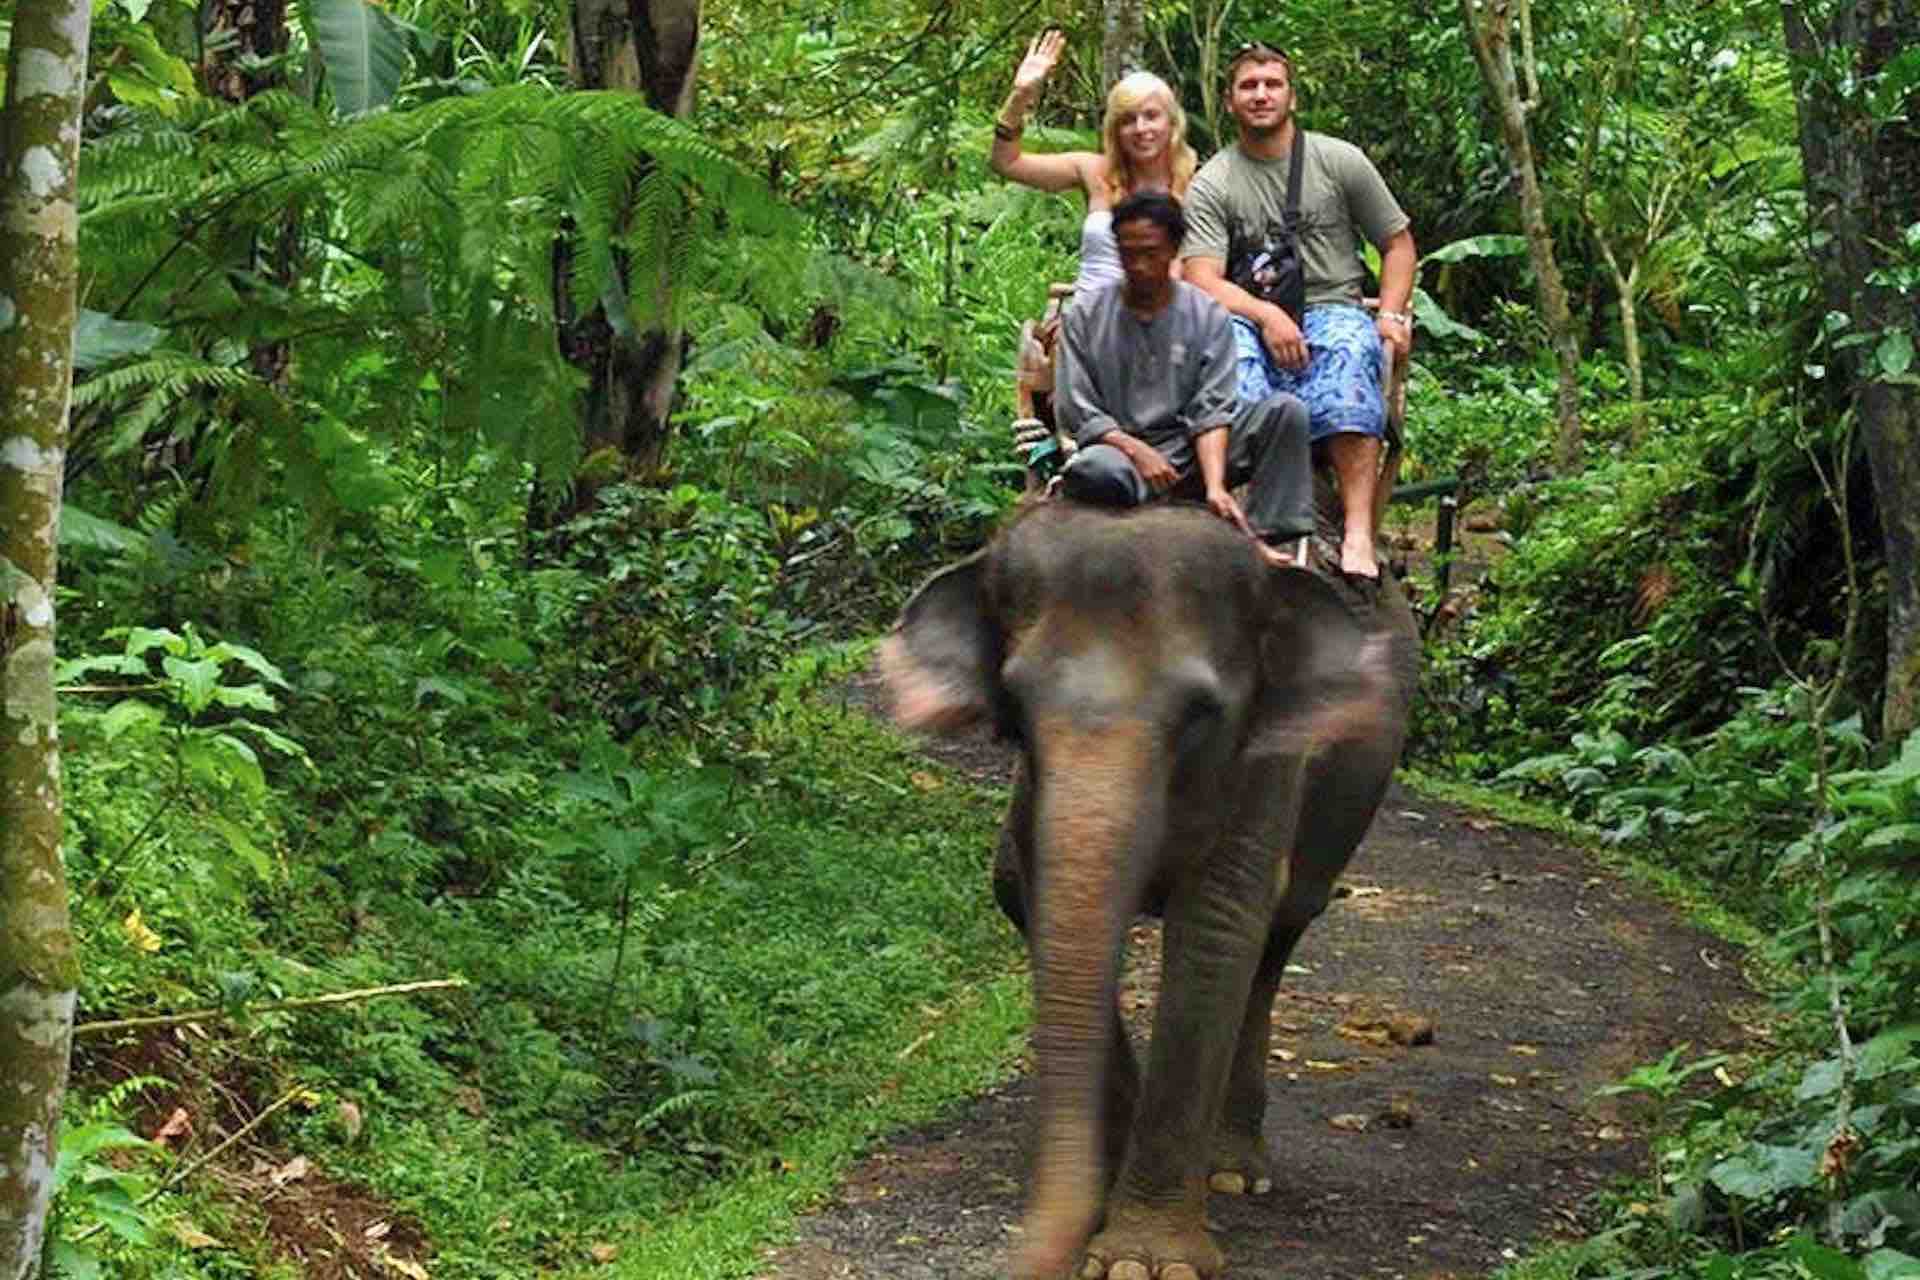 Bali elephant ride with guests in jungle